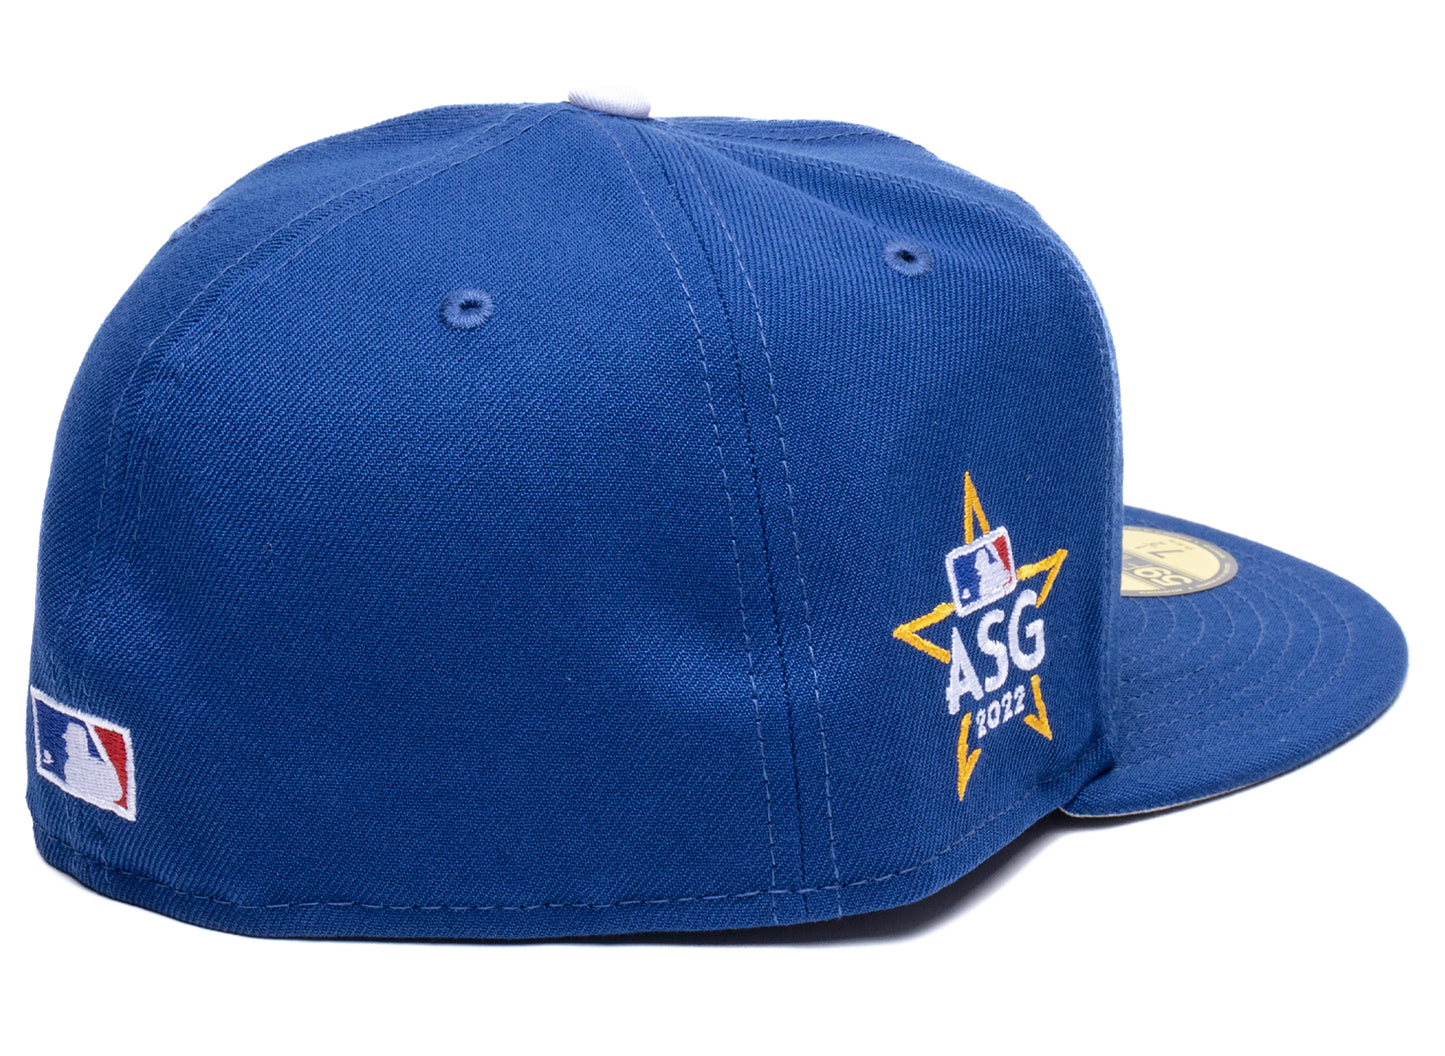 New Era Los Angeles Dodgers All Star Game Hat xld